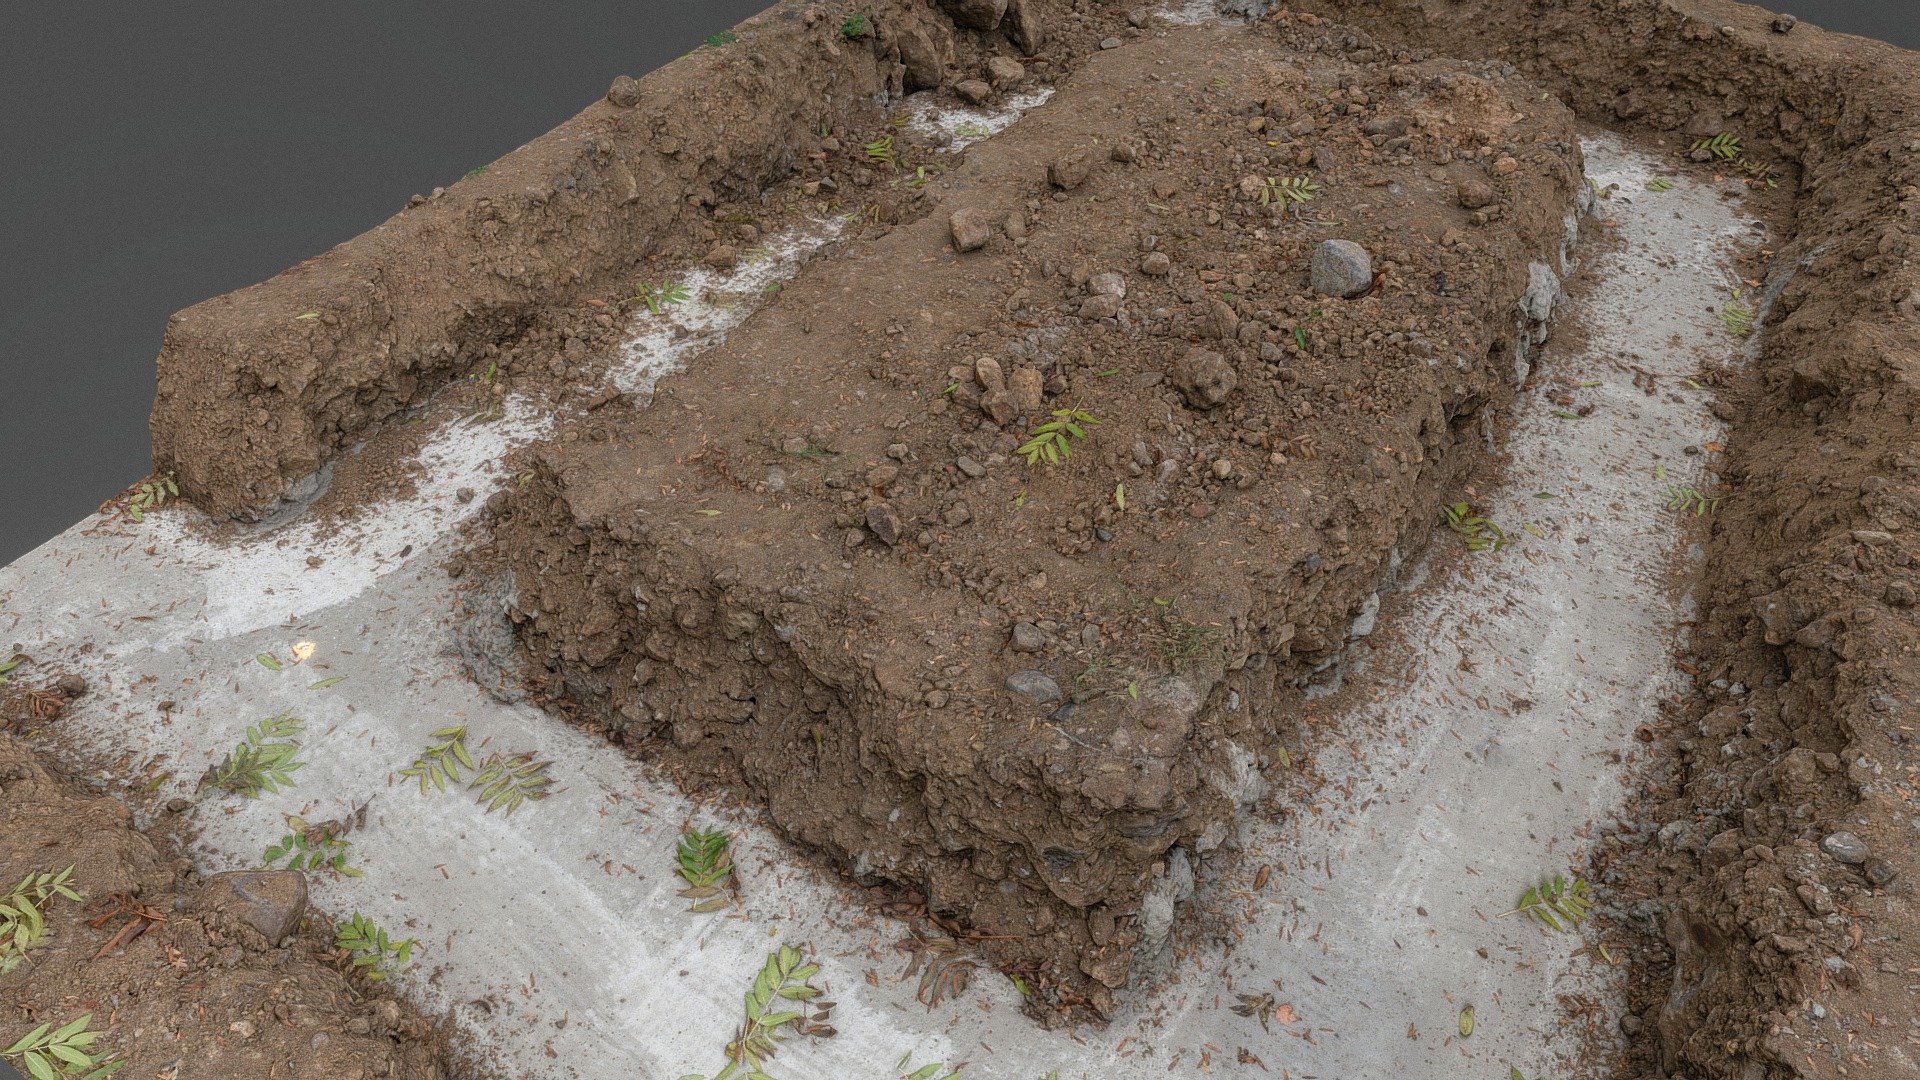 Concrete house hut foundations Construction dig site excavation building ground earth work, dug-out trench ditch, technical site inspection

Photogrammetry scan 210 x 24MP, 3x16K textures + HD normals - Concrete foundations - Buy Royalty Free 3D model by matousekfoto 3d model